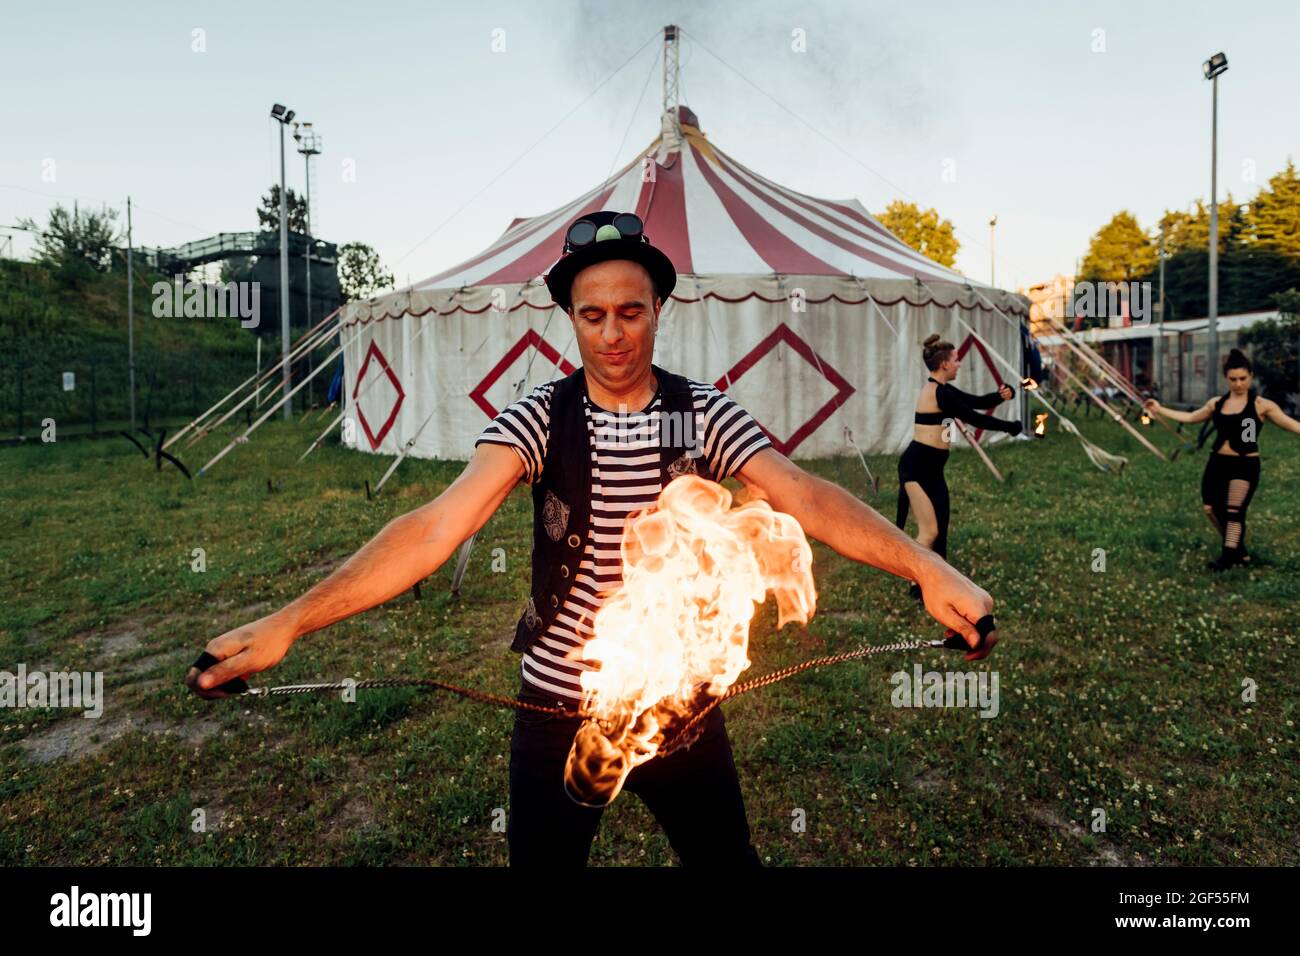 Male fire dancer holding fire equipment while practicing in front of circus tent Stock Photo